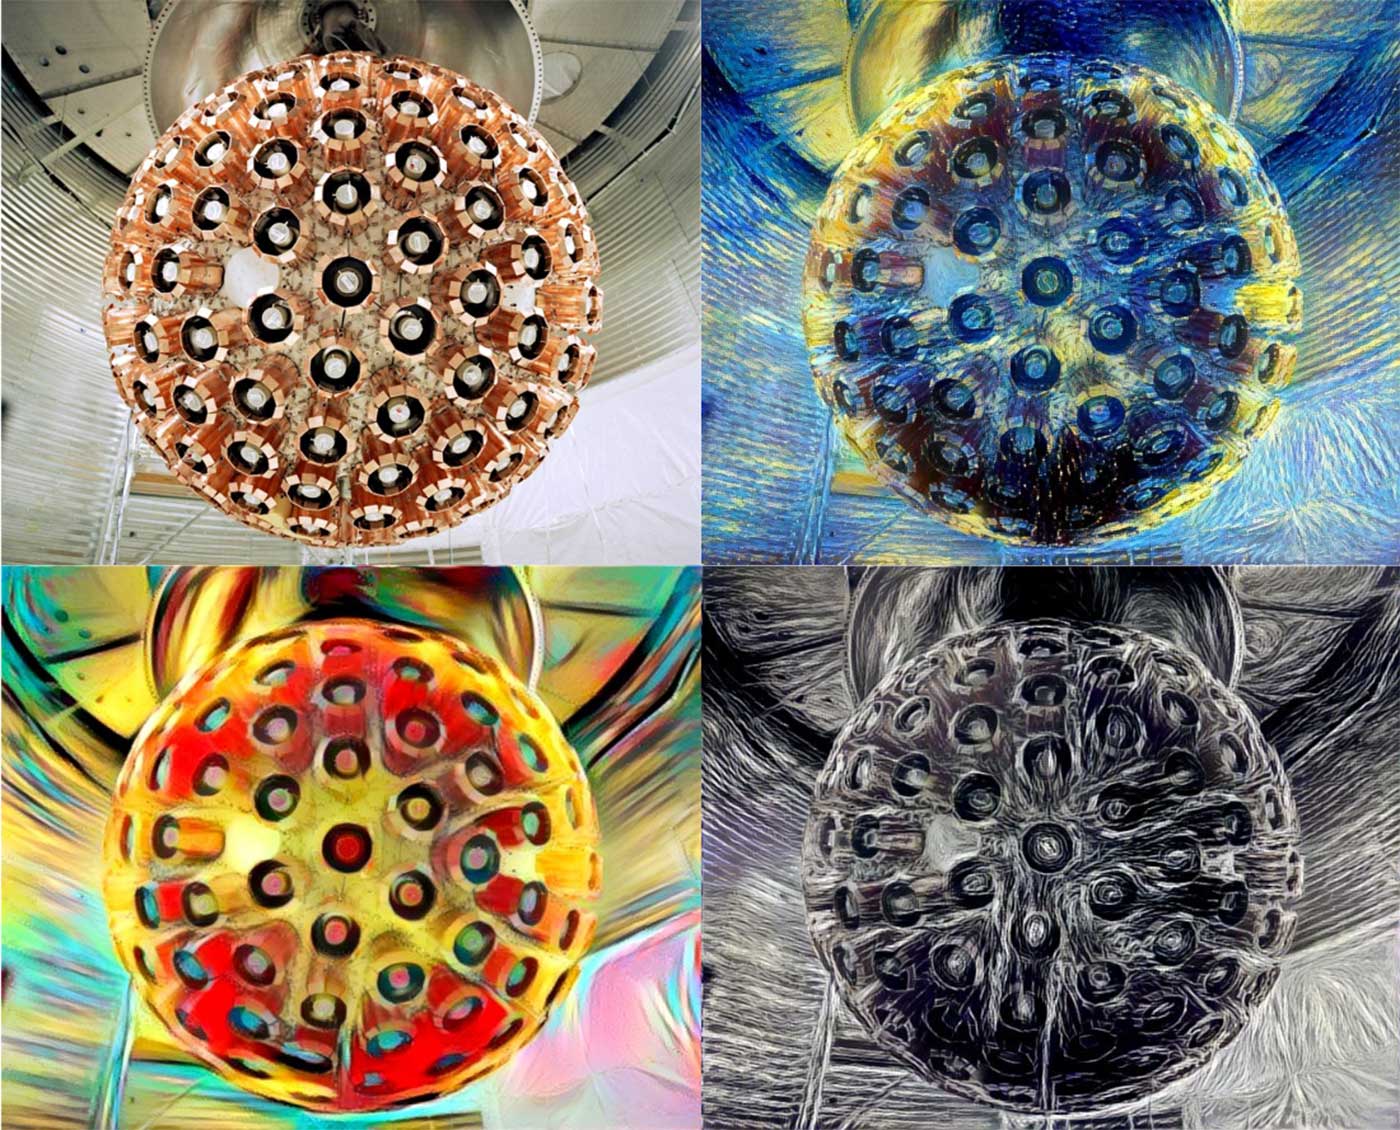 Three stylized images alongside the copper cylinders dark matter detector